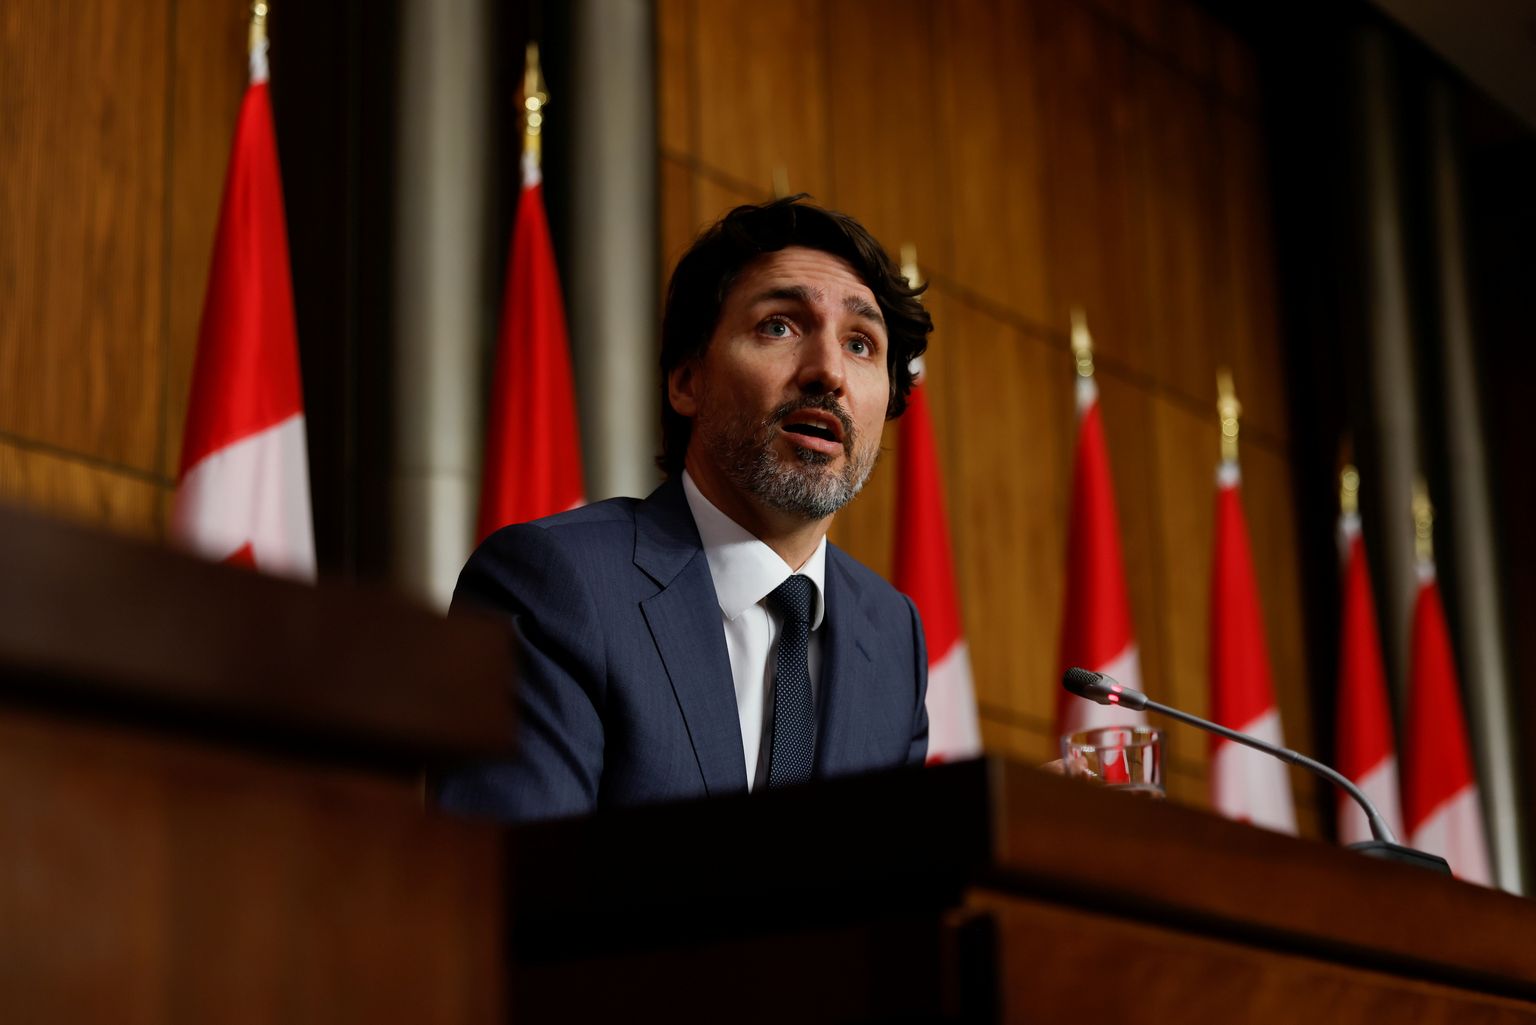 FILE PHOTO: Canada's Prime Minister Justin Trudeau attends a news conference, as efforts continue to help slow the spread of the coronavirus disease (COVID-19), in Ottawa, Ontario, Canada April 13, 2021. REUTERS/Blair Gable/File Photo